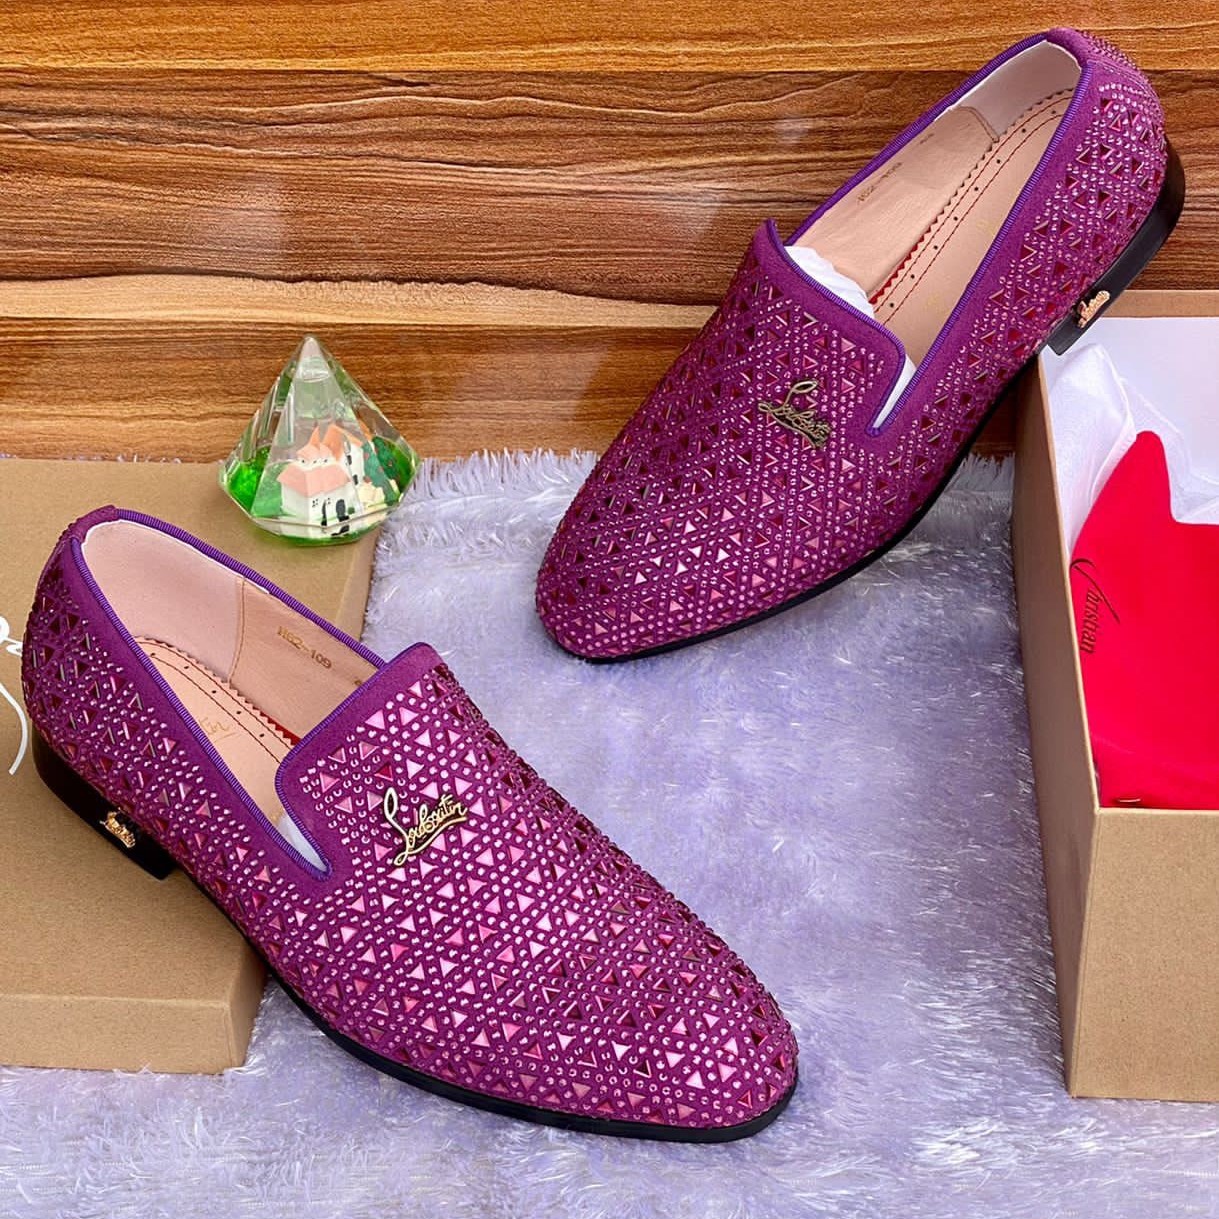 DESIGNERS STONES PATTERNED LOAFERS for CartRollers Marketplace For Shopping Online, Fashion, Electronics, Phones, Computers and Buy Men Shoe, Home Appliances, Kitchen-wares, Groceries Accessories, ankara, Aso-Ebi, Beads, Boys Casual Wears, Children Children's Wears ,Corporate Shoes, Cosmetics Dress ,Dresses Fashion, Girls' Dresses ,Girls' Wears, Hair Care ,Jewelries ,Jewelry Kids, Kids' Fashion Ladies ,Wears Lapel Pins, Loafers Shoe Men ,Men's Caftan, Men's Casual Shoes, Men's Fashion, Men's Shoes, Men's Wears, Moccasin Shoe, Natural Hair, In Lagos Nigeria